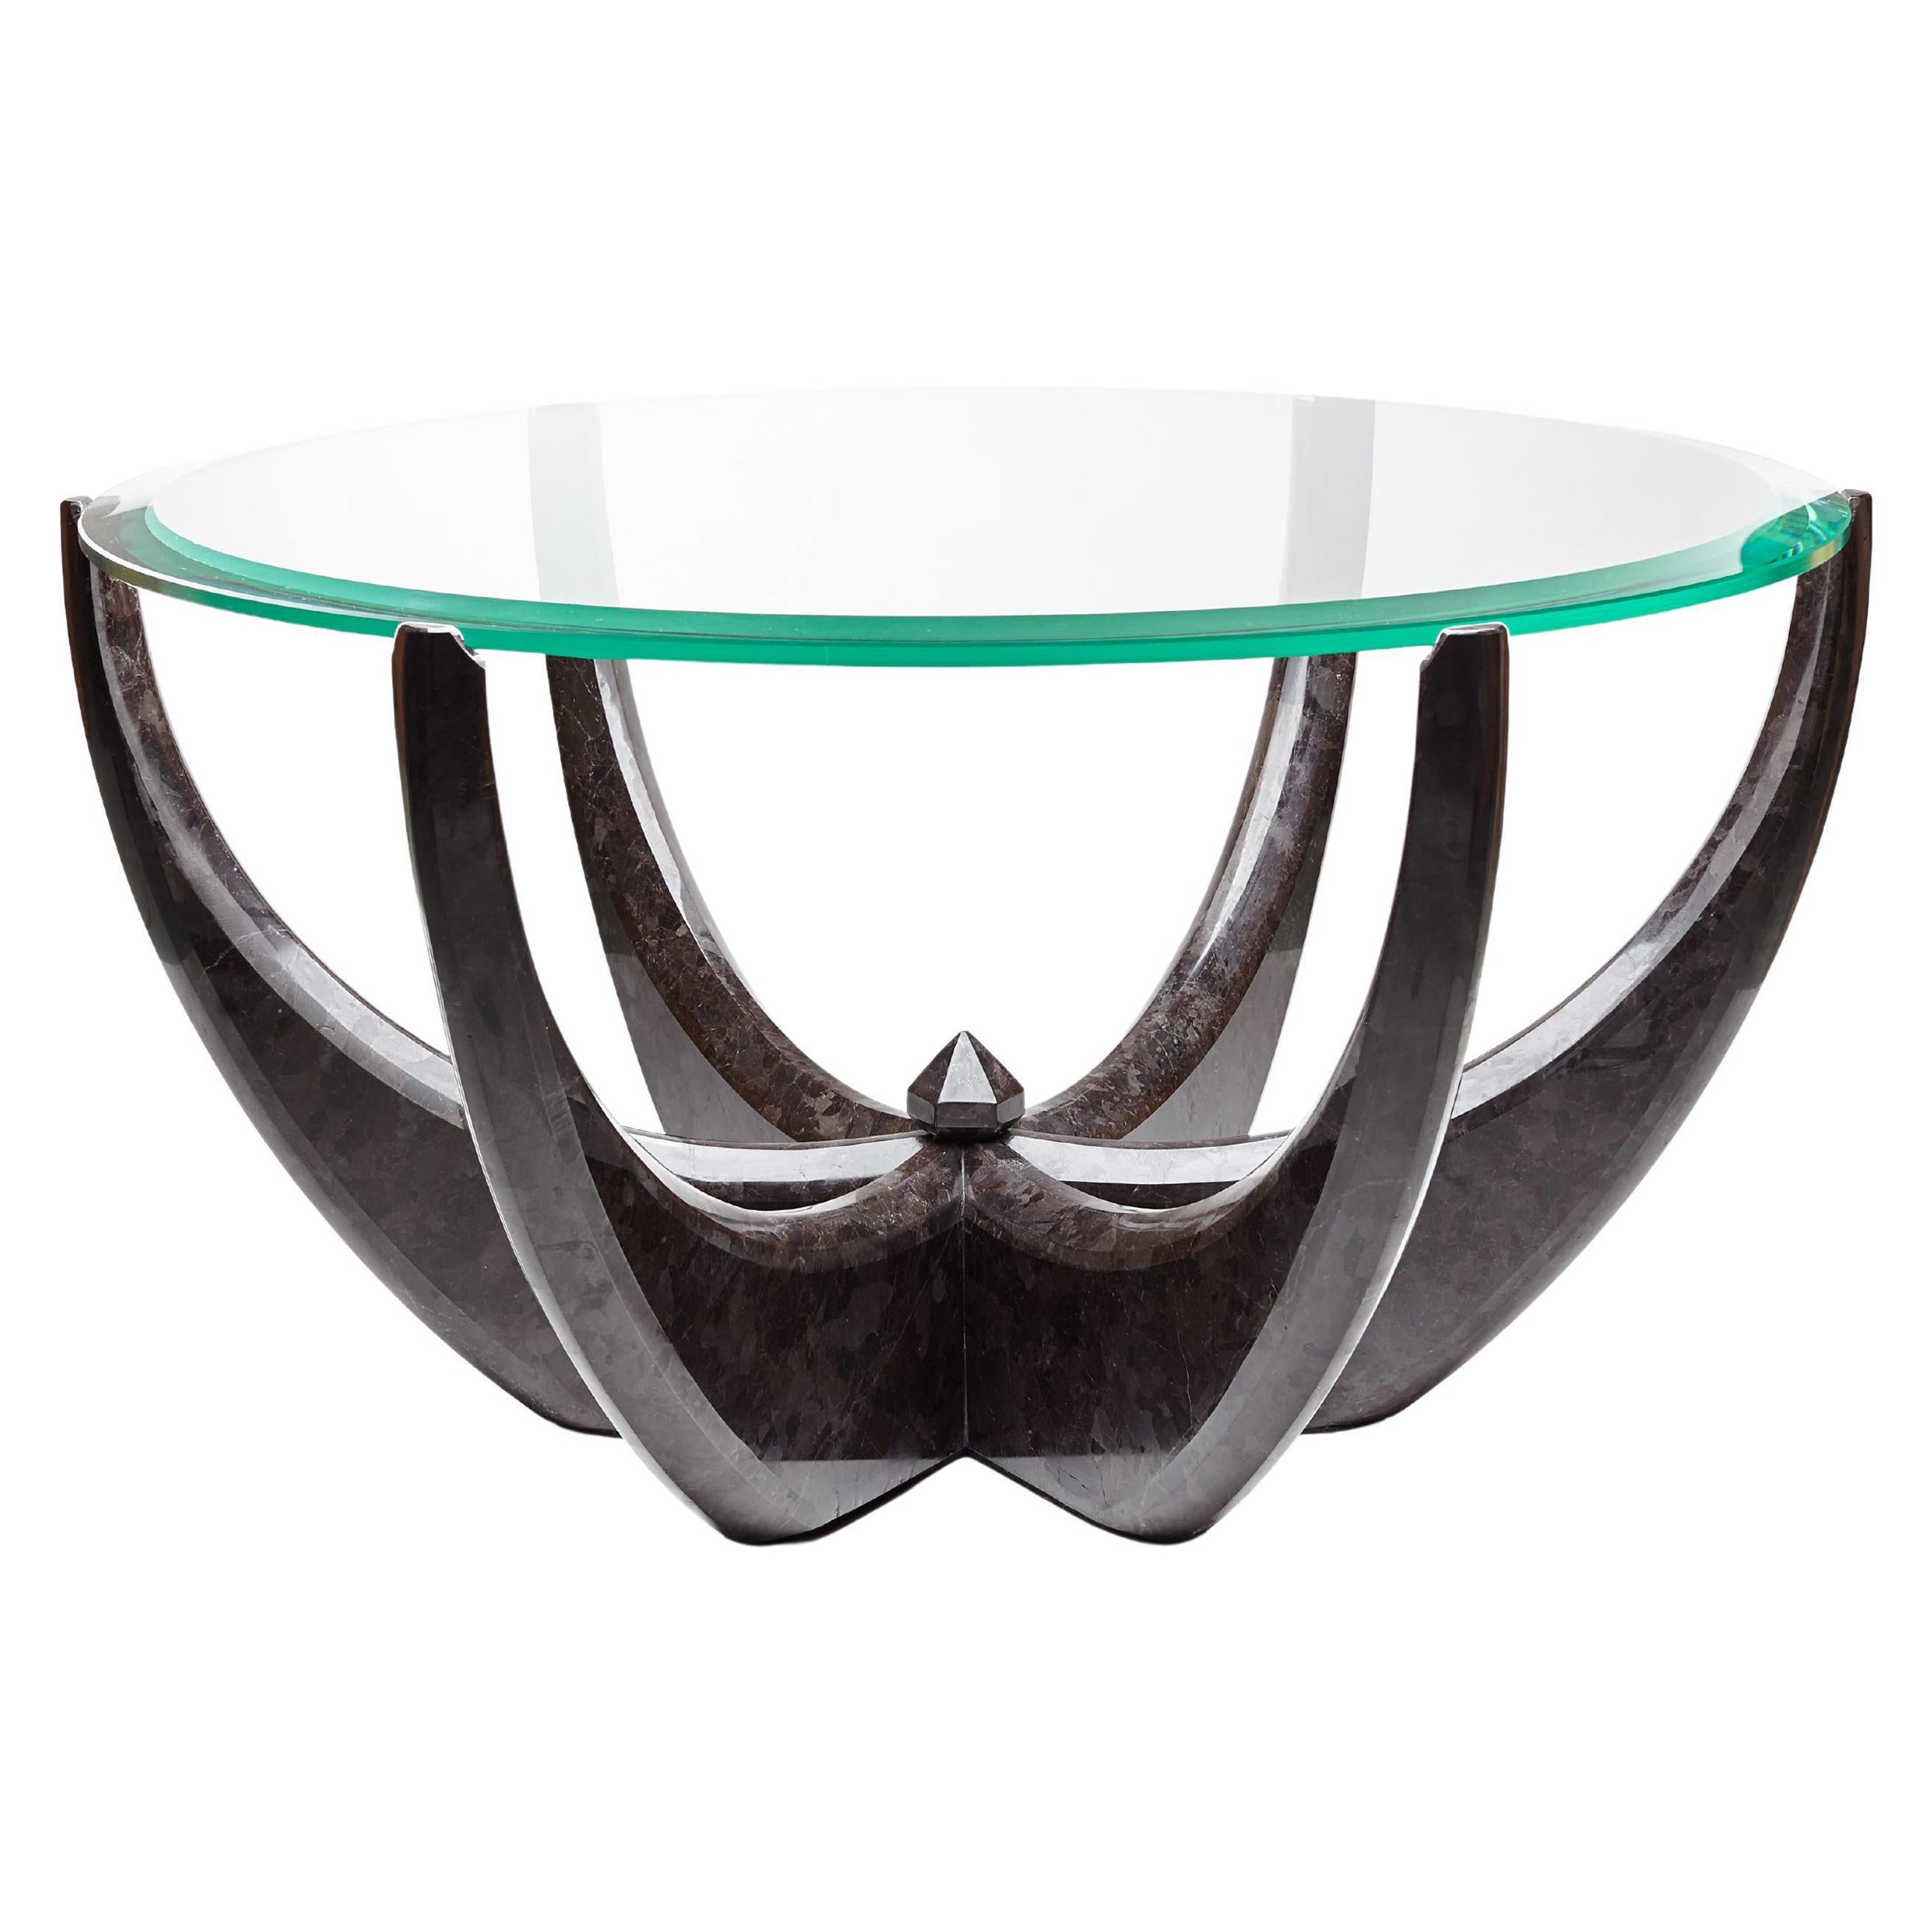 Diamond Ring Center Table, 1 of 1 by Grzegorz Majka For Sale